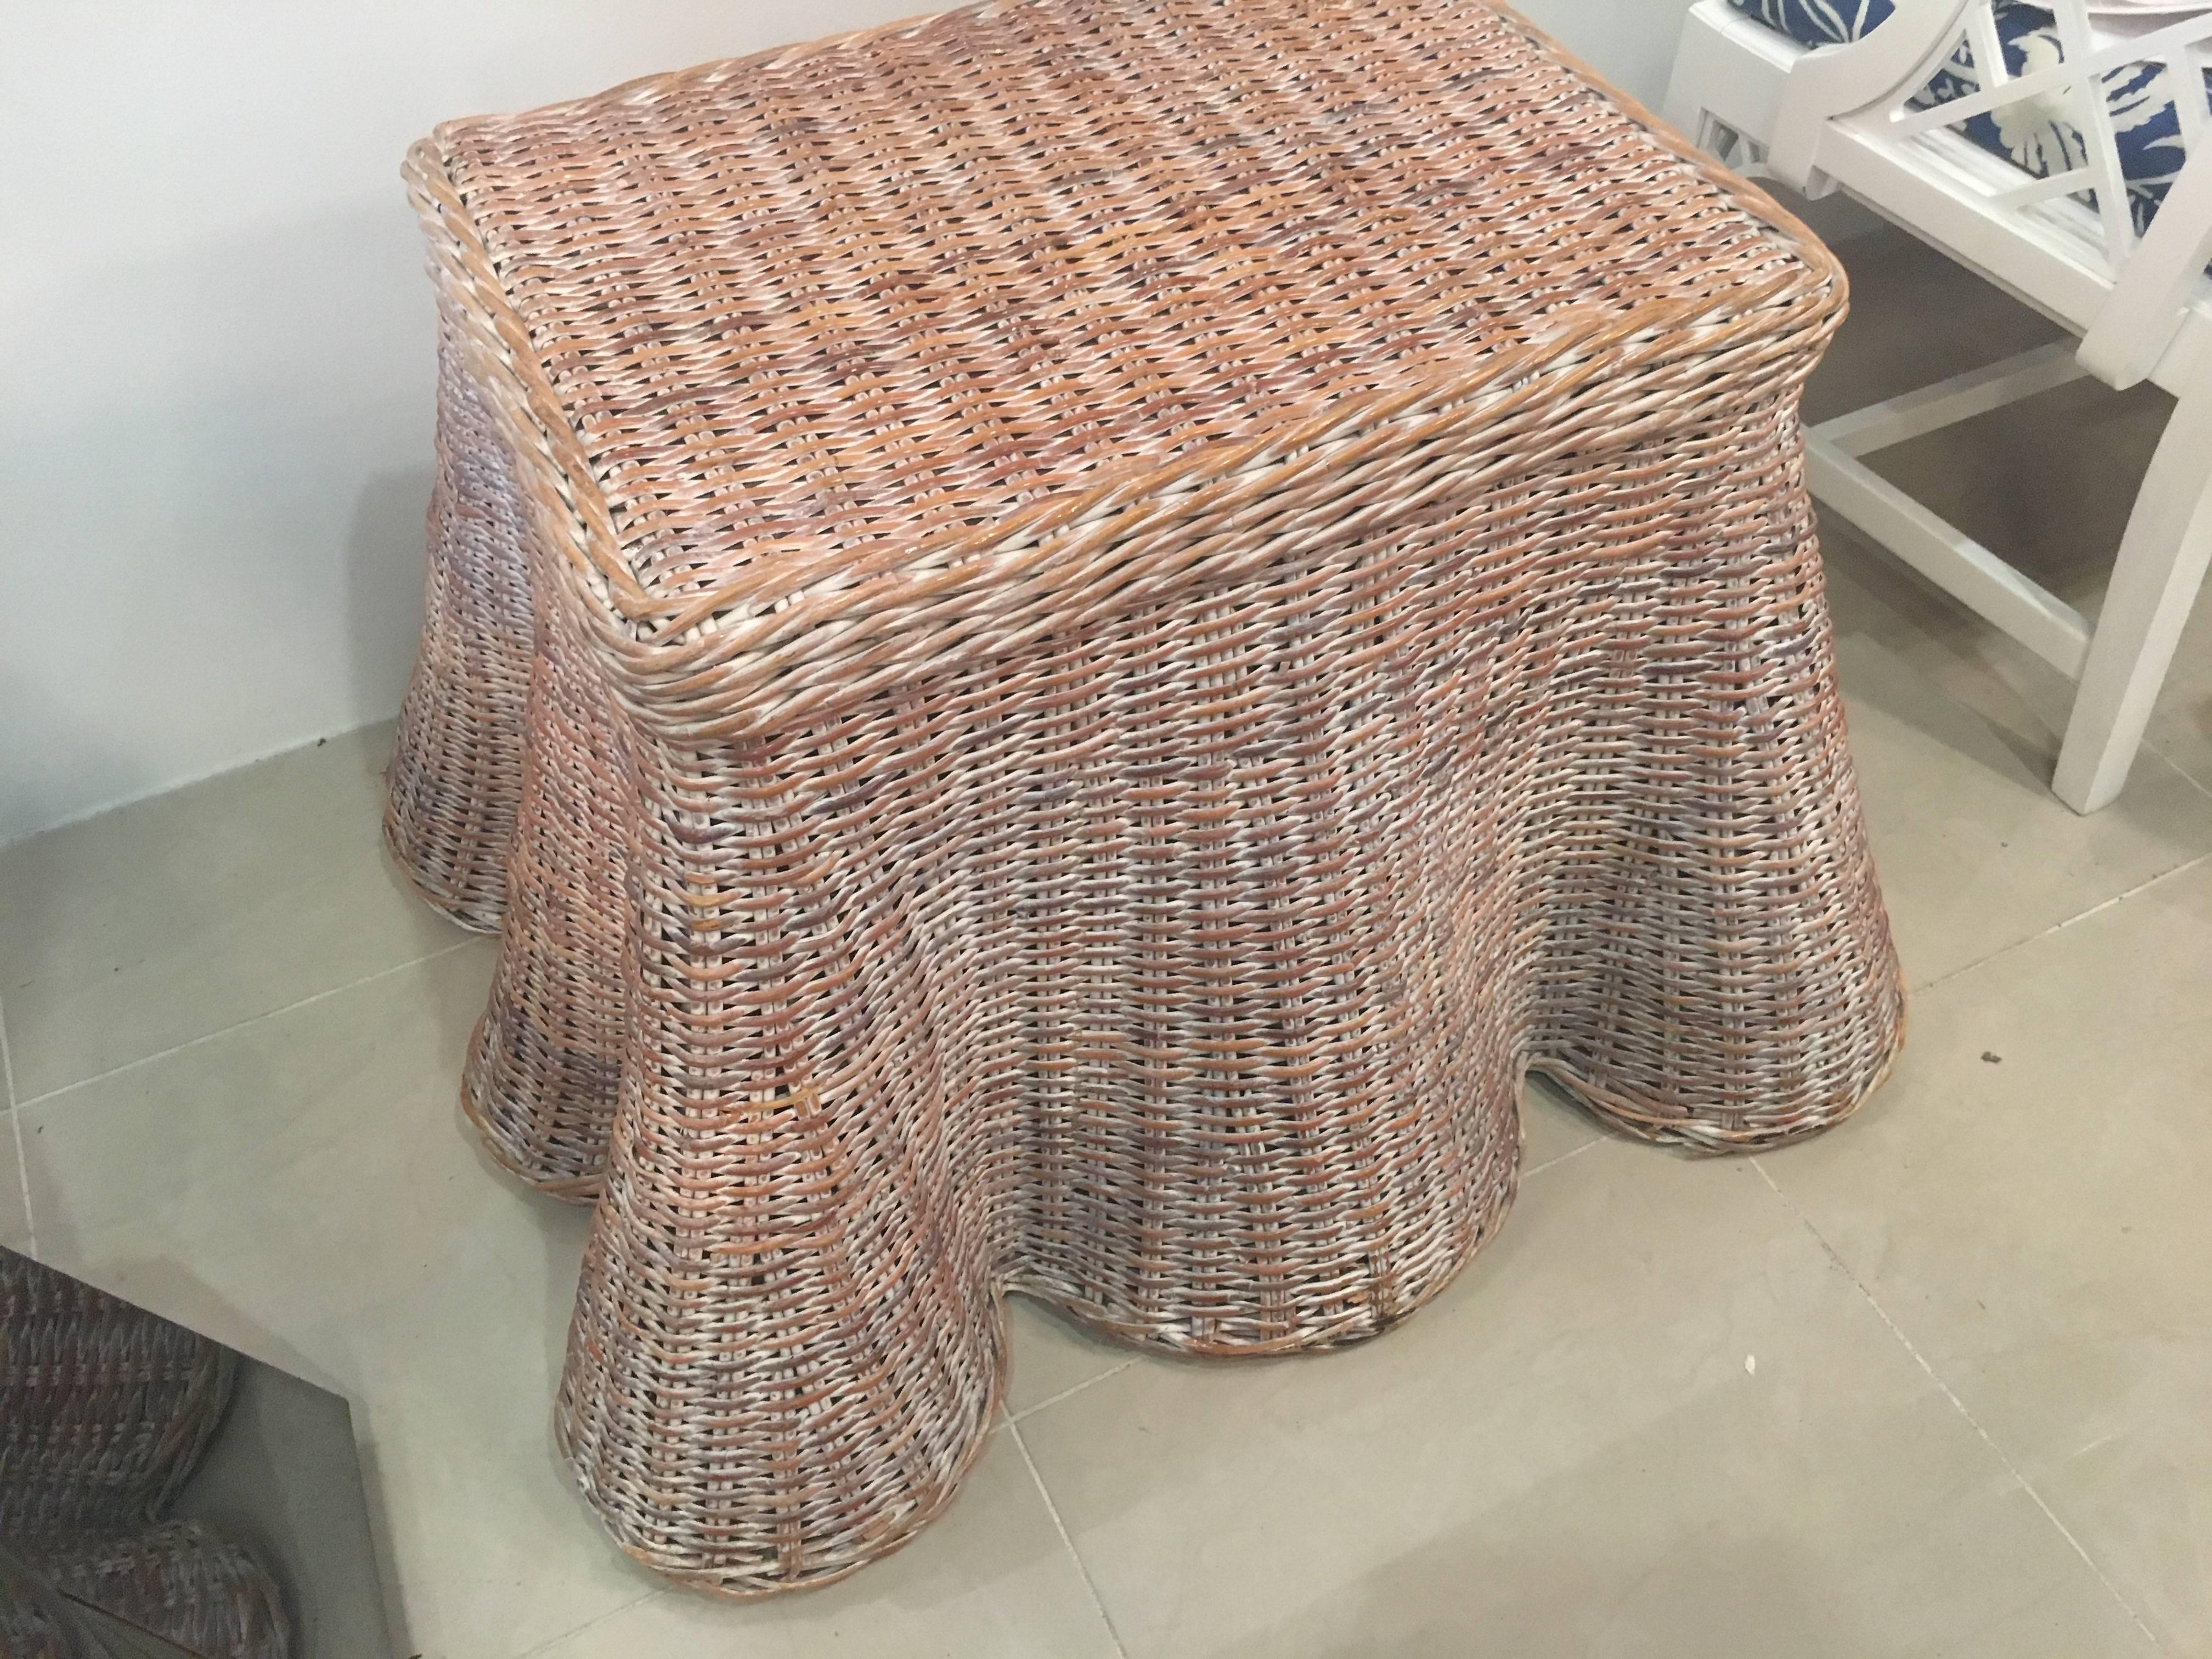 Late 20th Century Draped Wicker Coffee, Cocktail or End Table Vintage